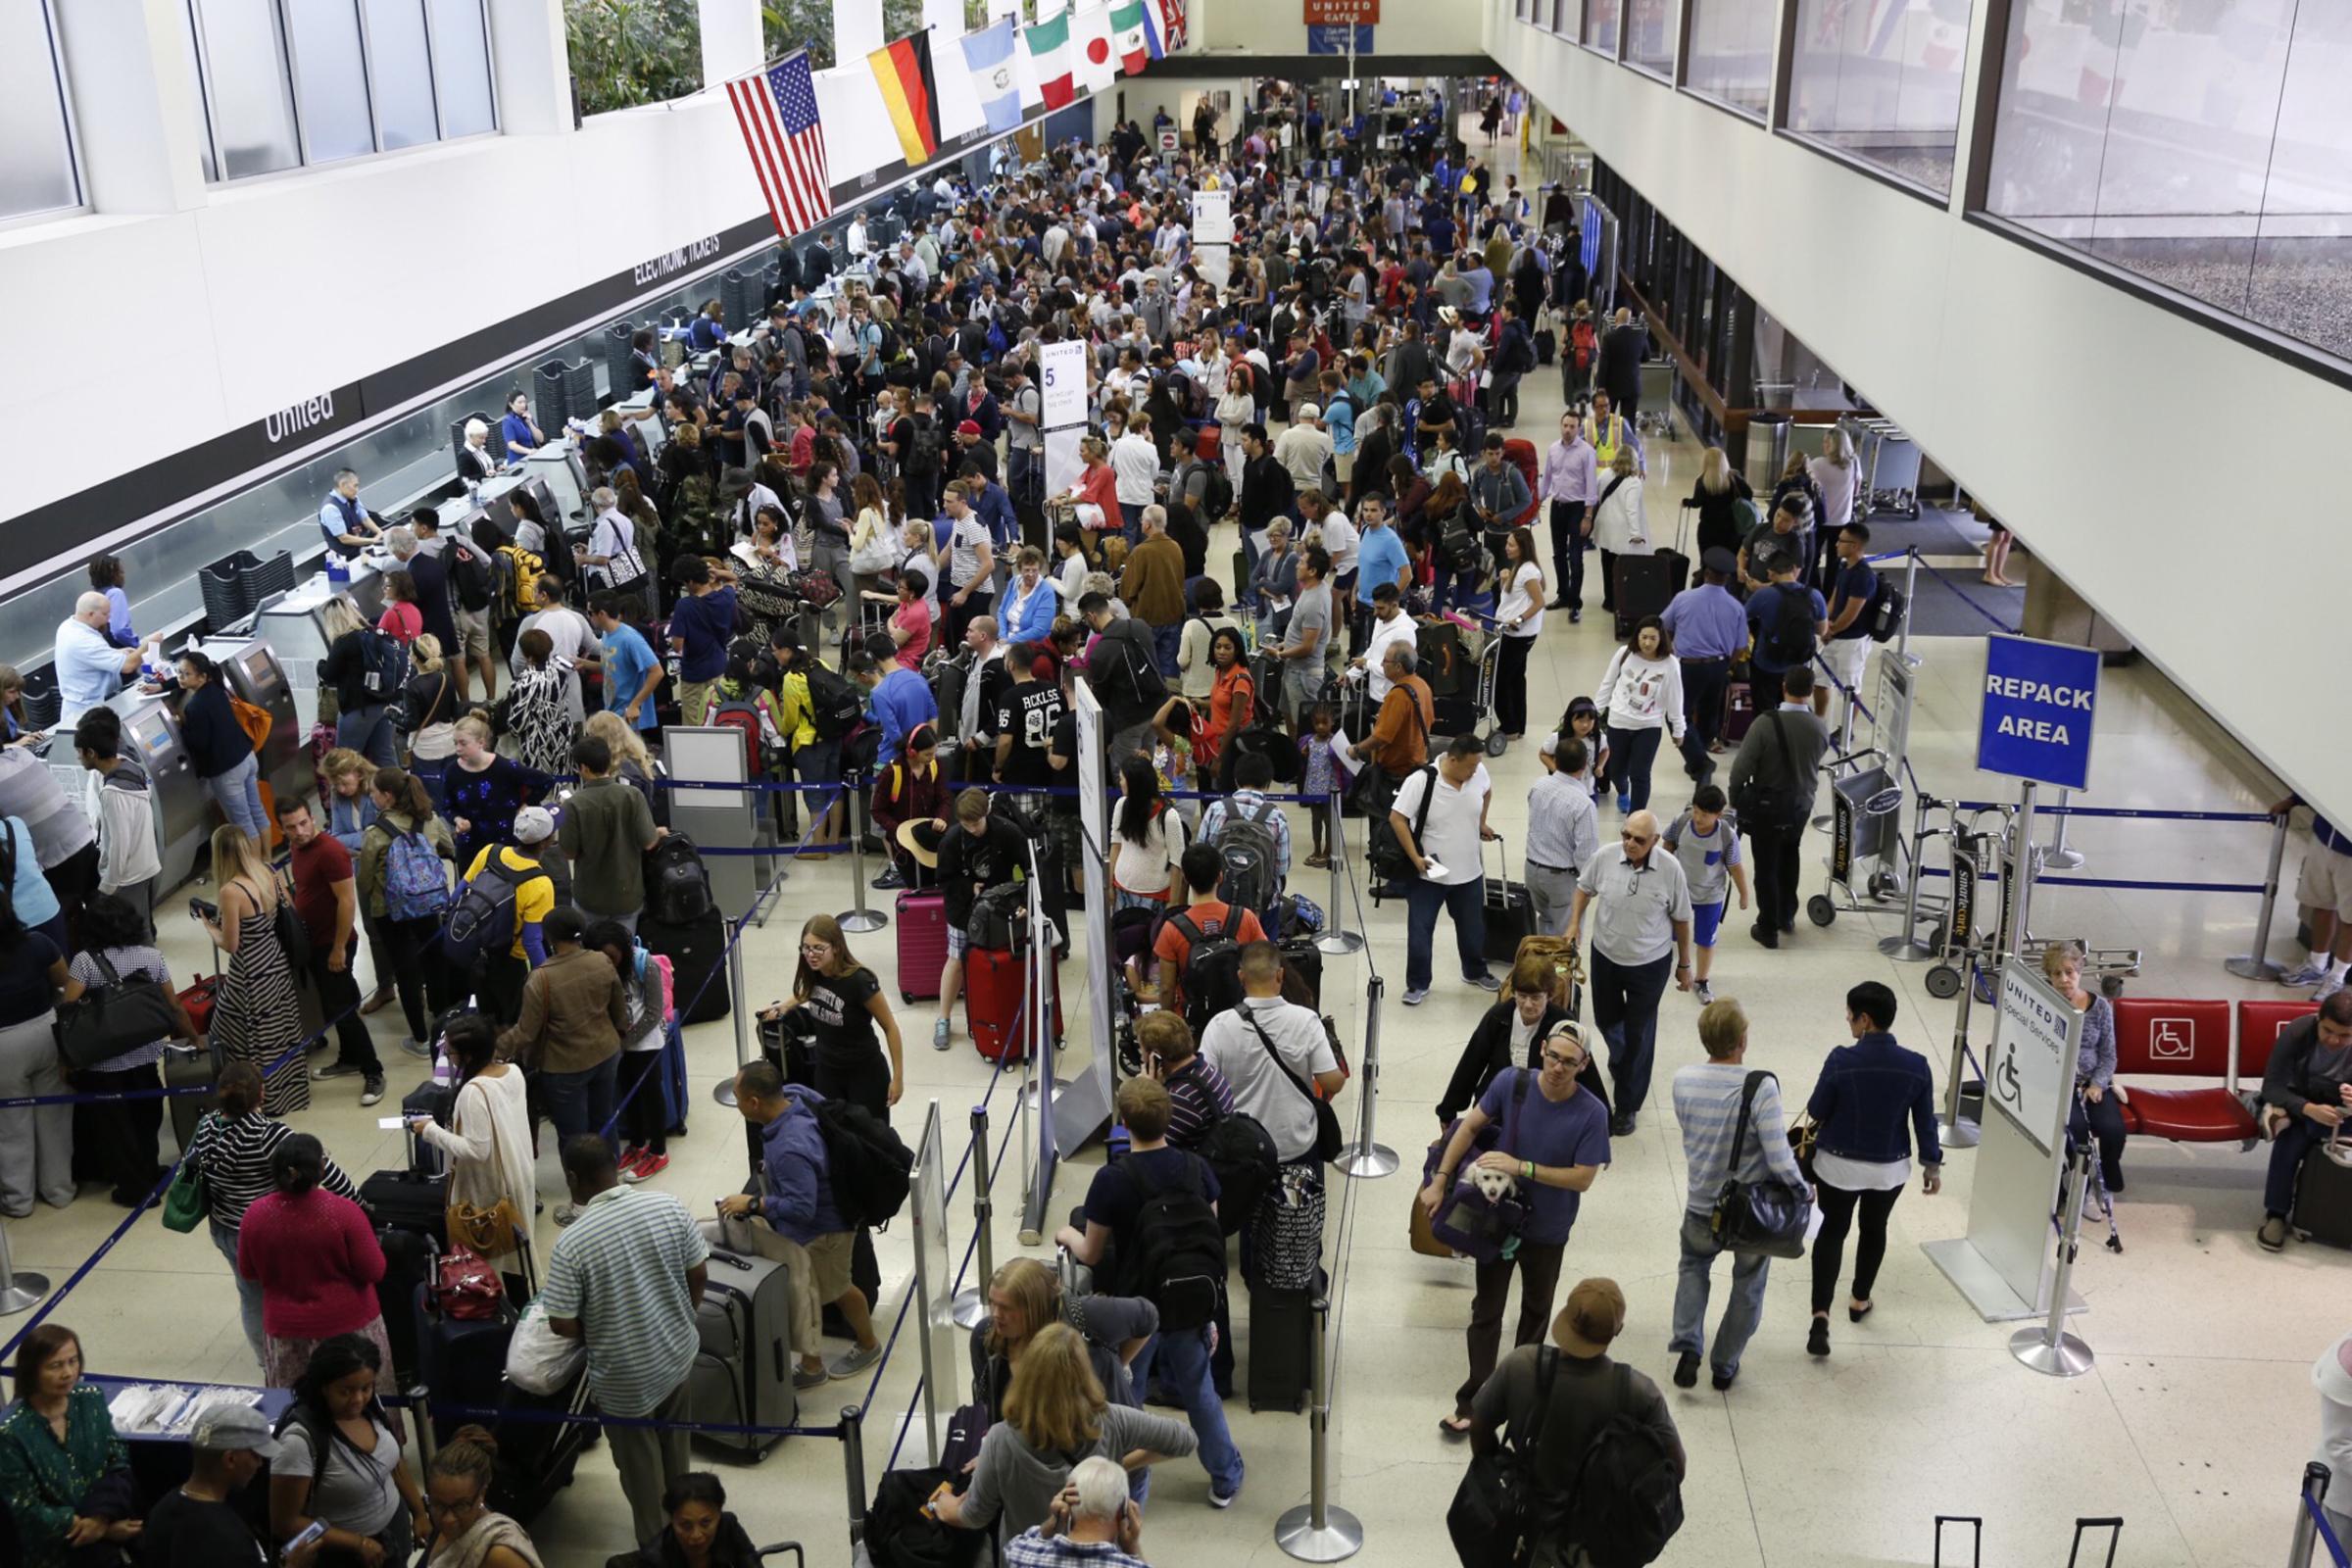 LOS ANGELES, CA JULY 8: Passengers wait in long lines at the United Airlines terminal at LAX in the morning after a nation-wide flight stoppage July 8, 2015 in Los Angeles, California. United Airlines flights are no longer grounded, according to an alert from the Federal Aviation Administration. (Photo by Al Seib/Los Angeles Times via Getty Images)